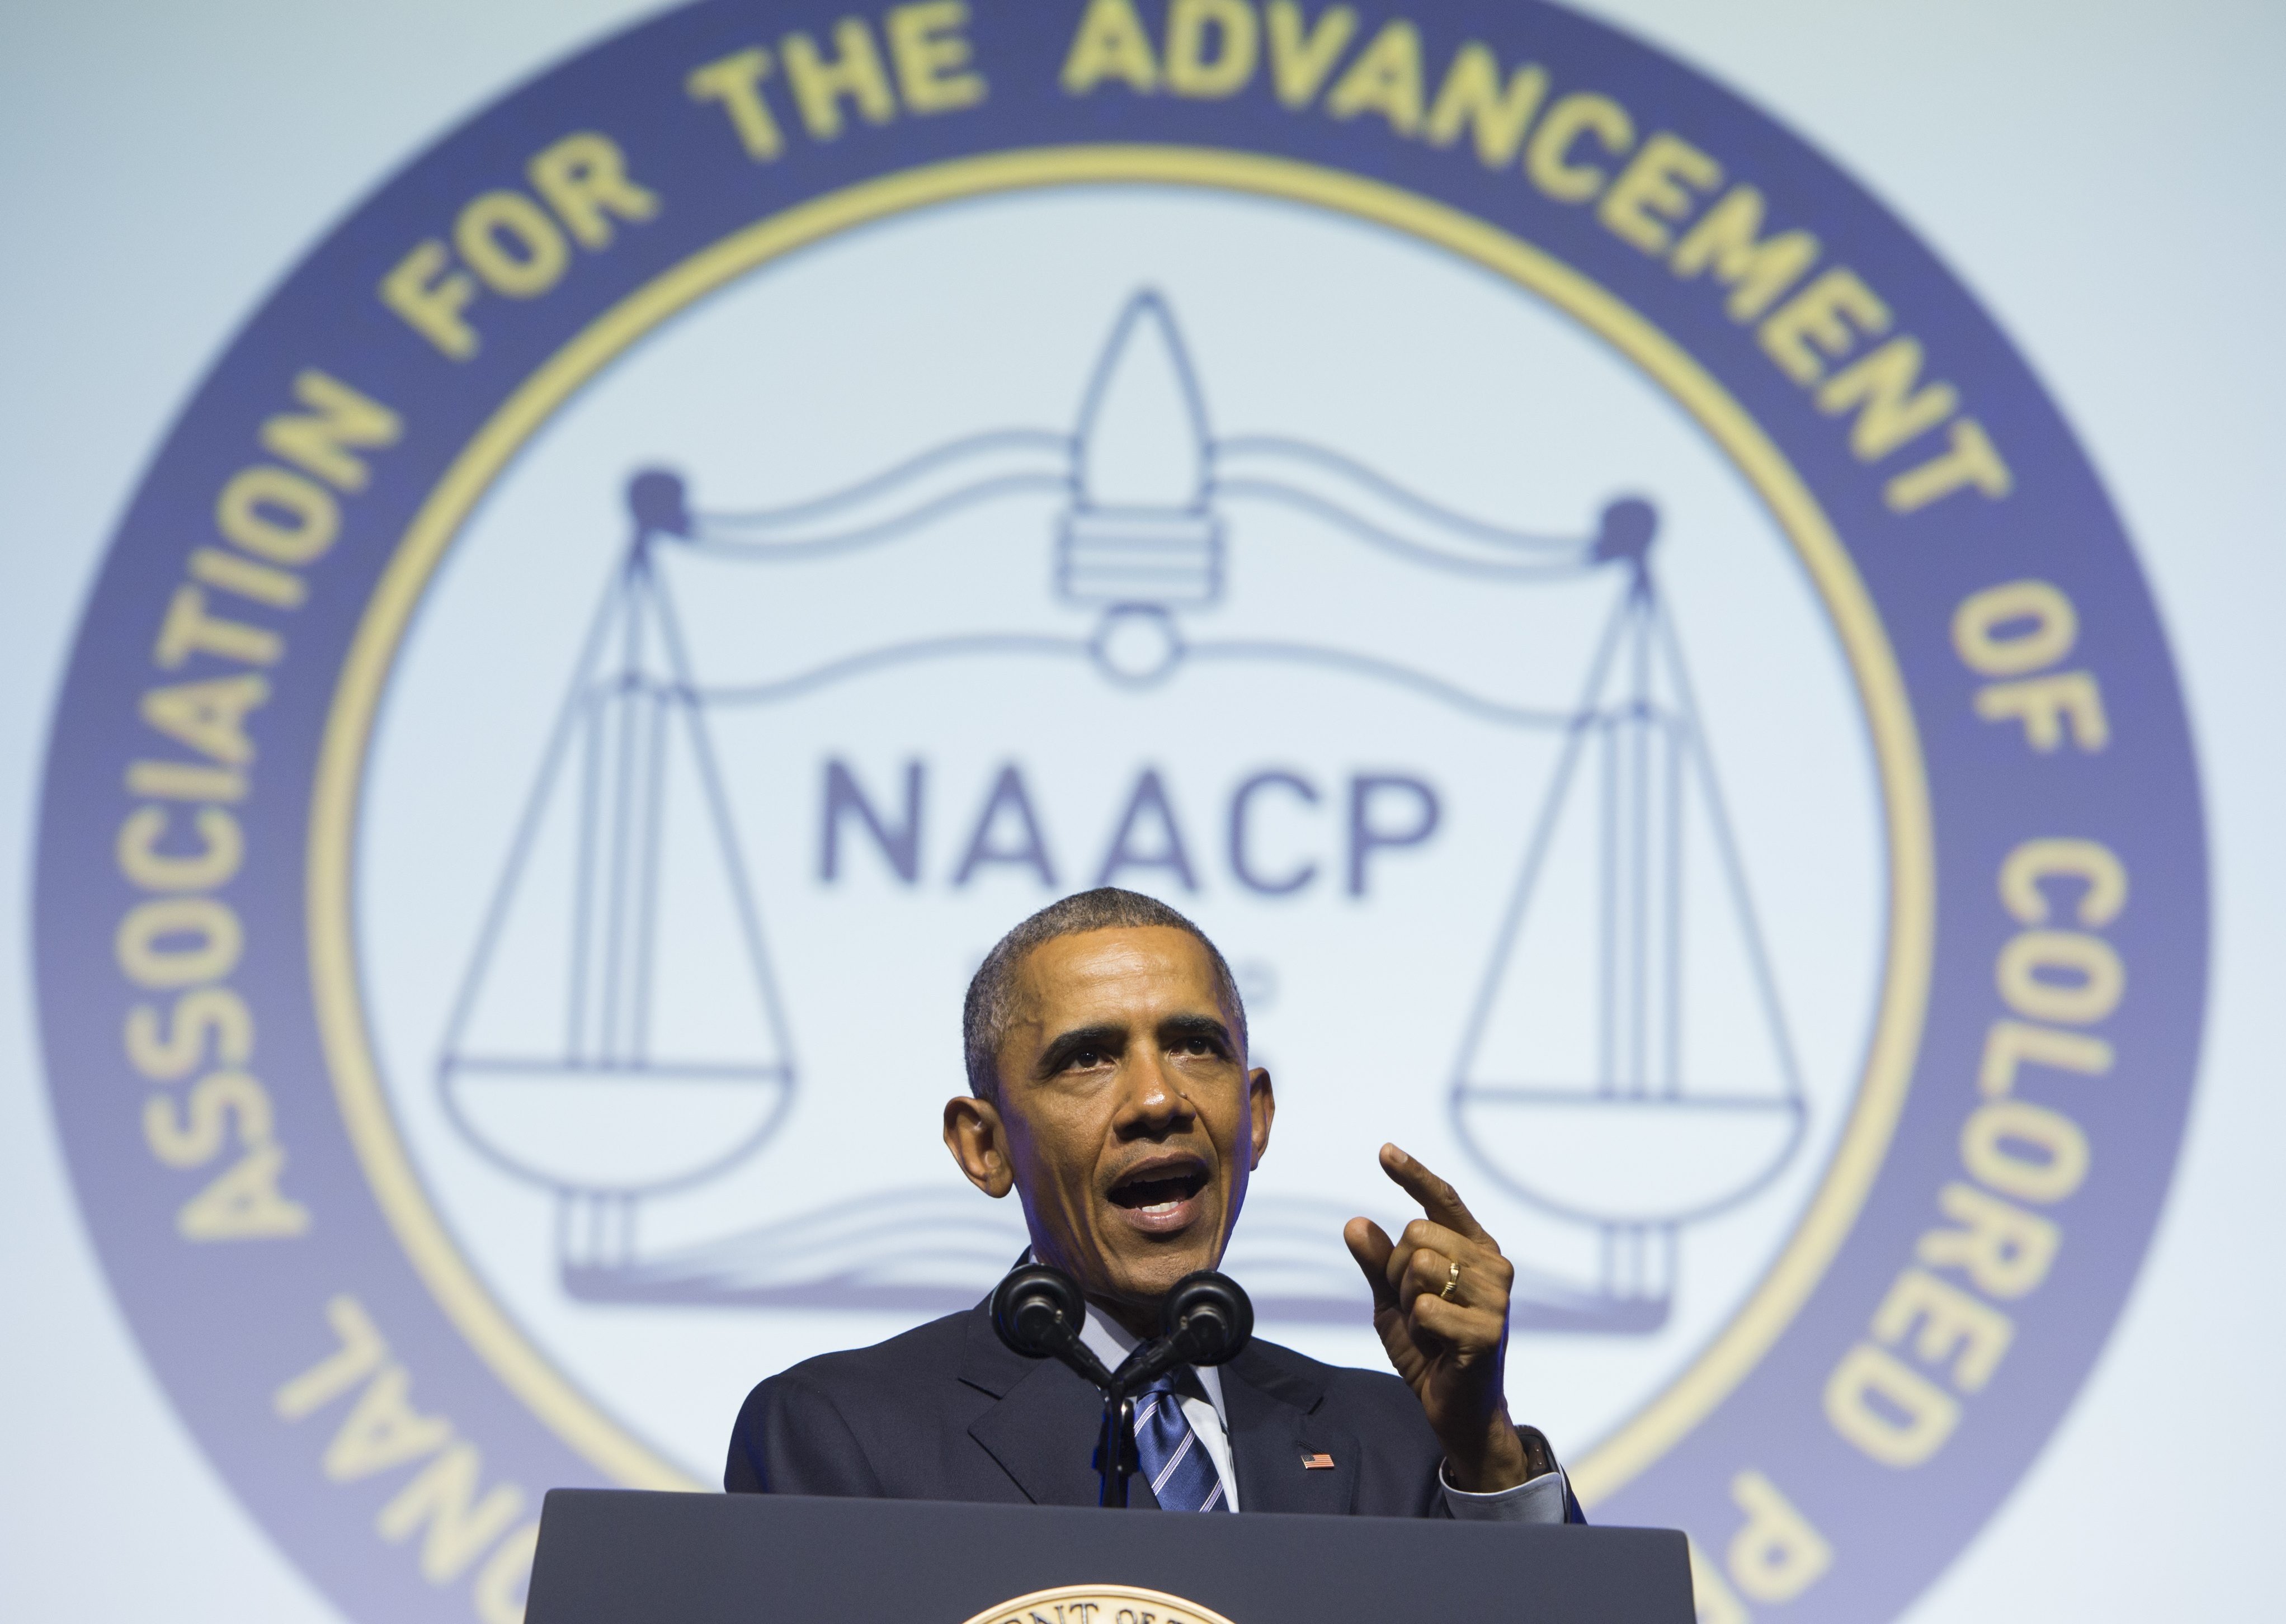 President Barack Obama speaks during the NAACP's 106th National Convention in Philadelphia on July 14, 2015.